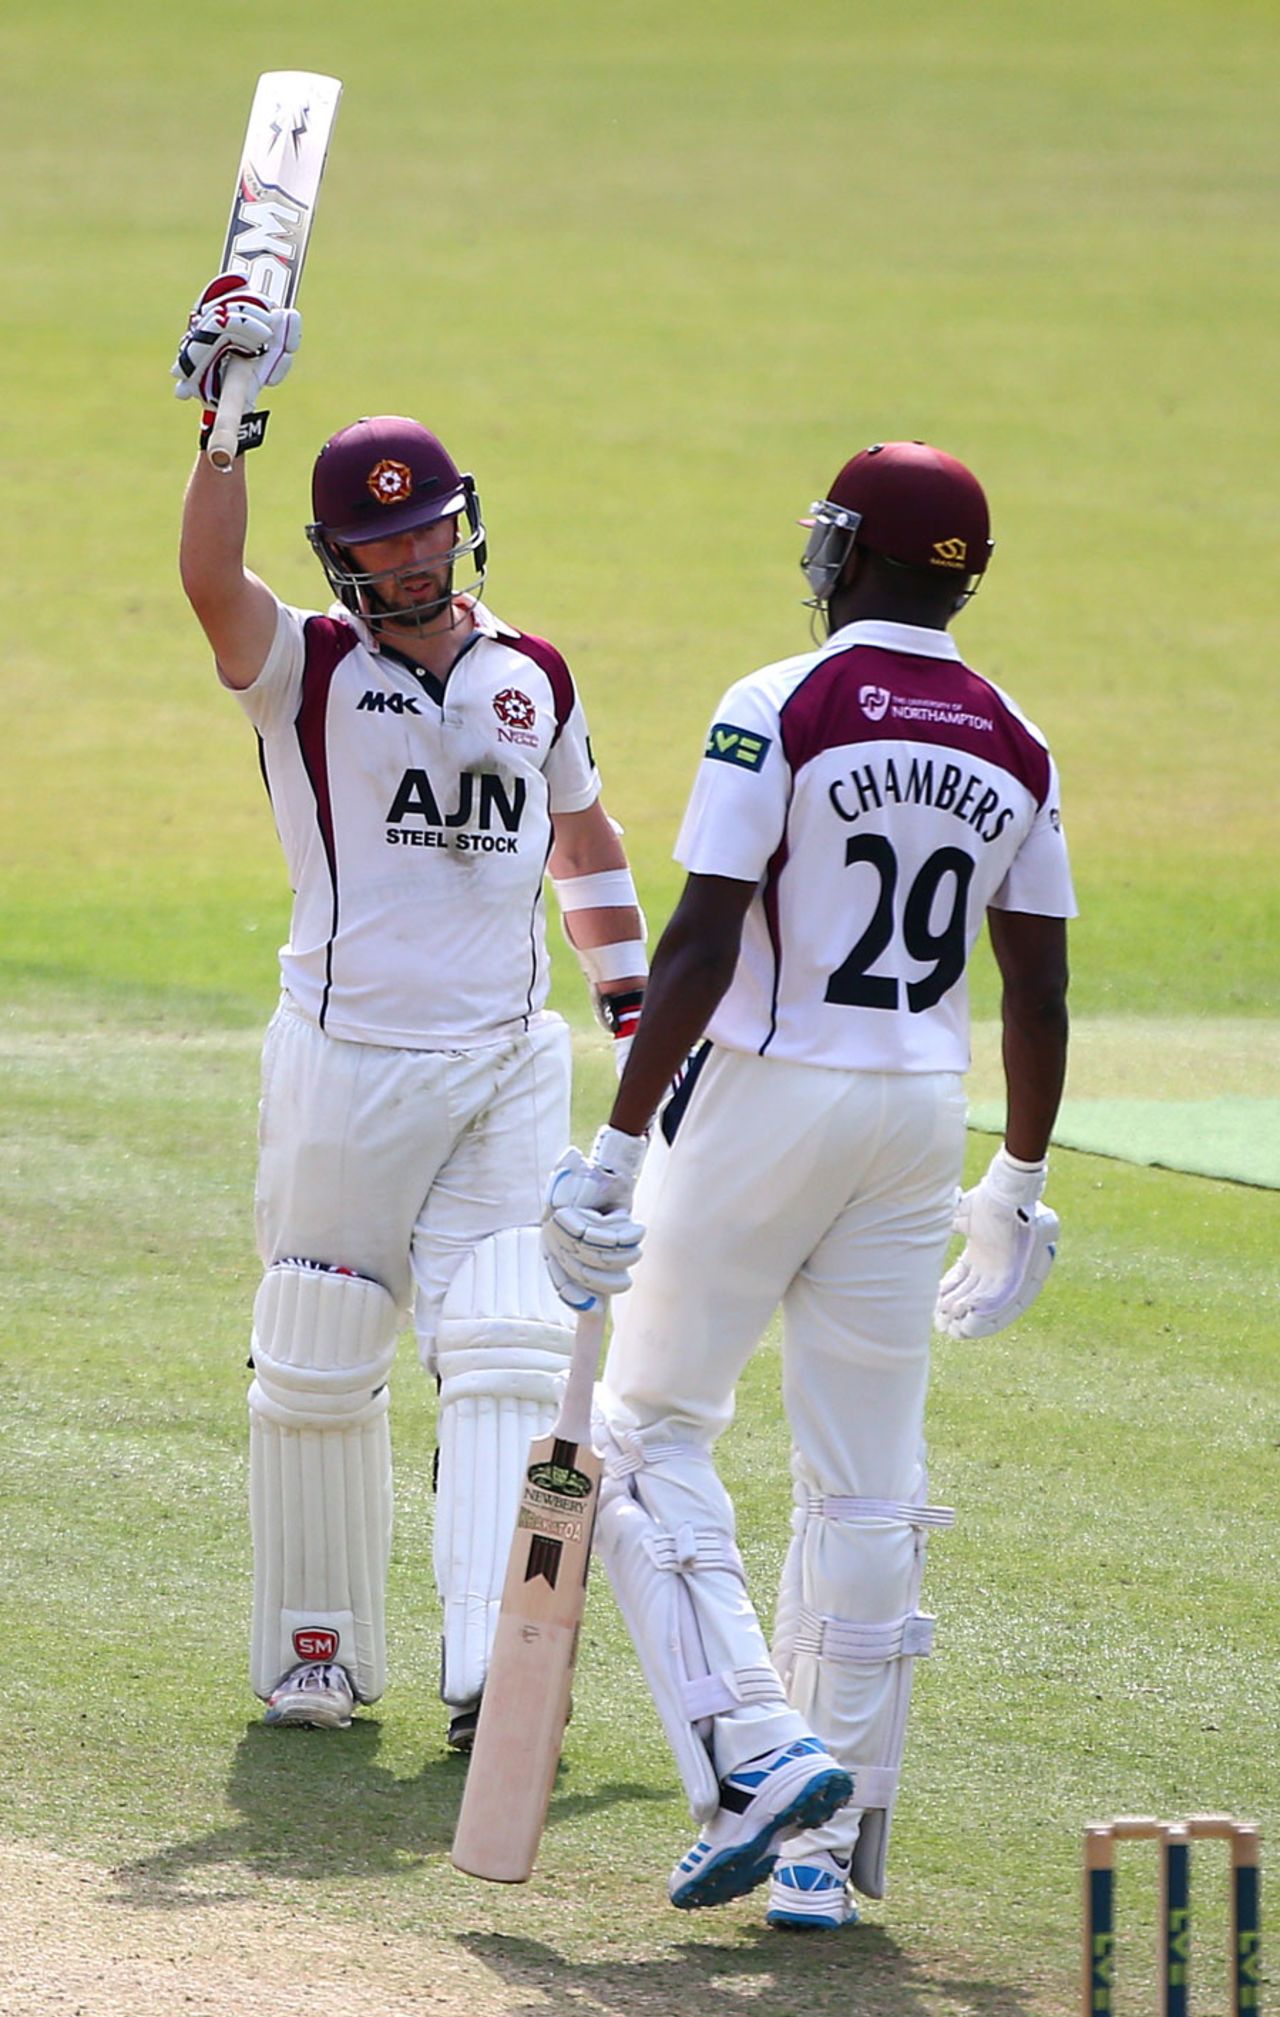 Steven Crook reached his maiden first-class hundred, Middlesex v Northamptonshire, County Championship, Division One, Lord's, 3rd day, July 1, 2014